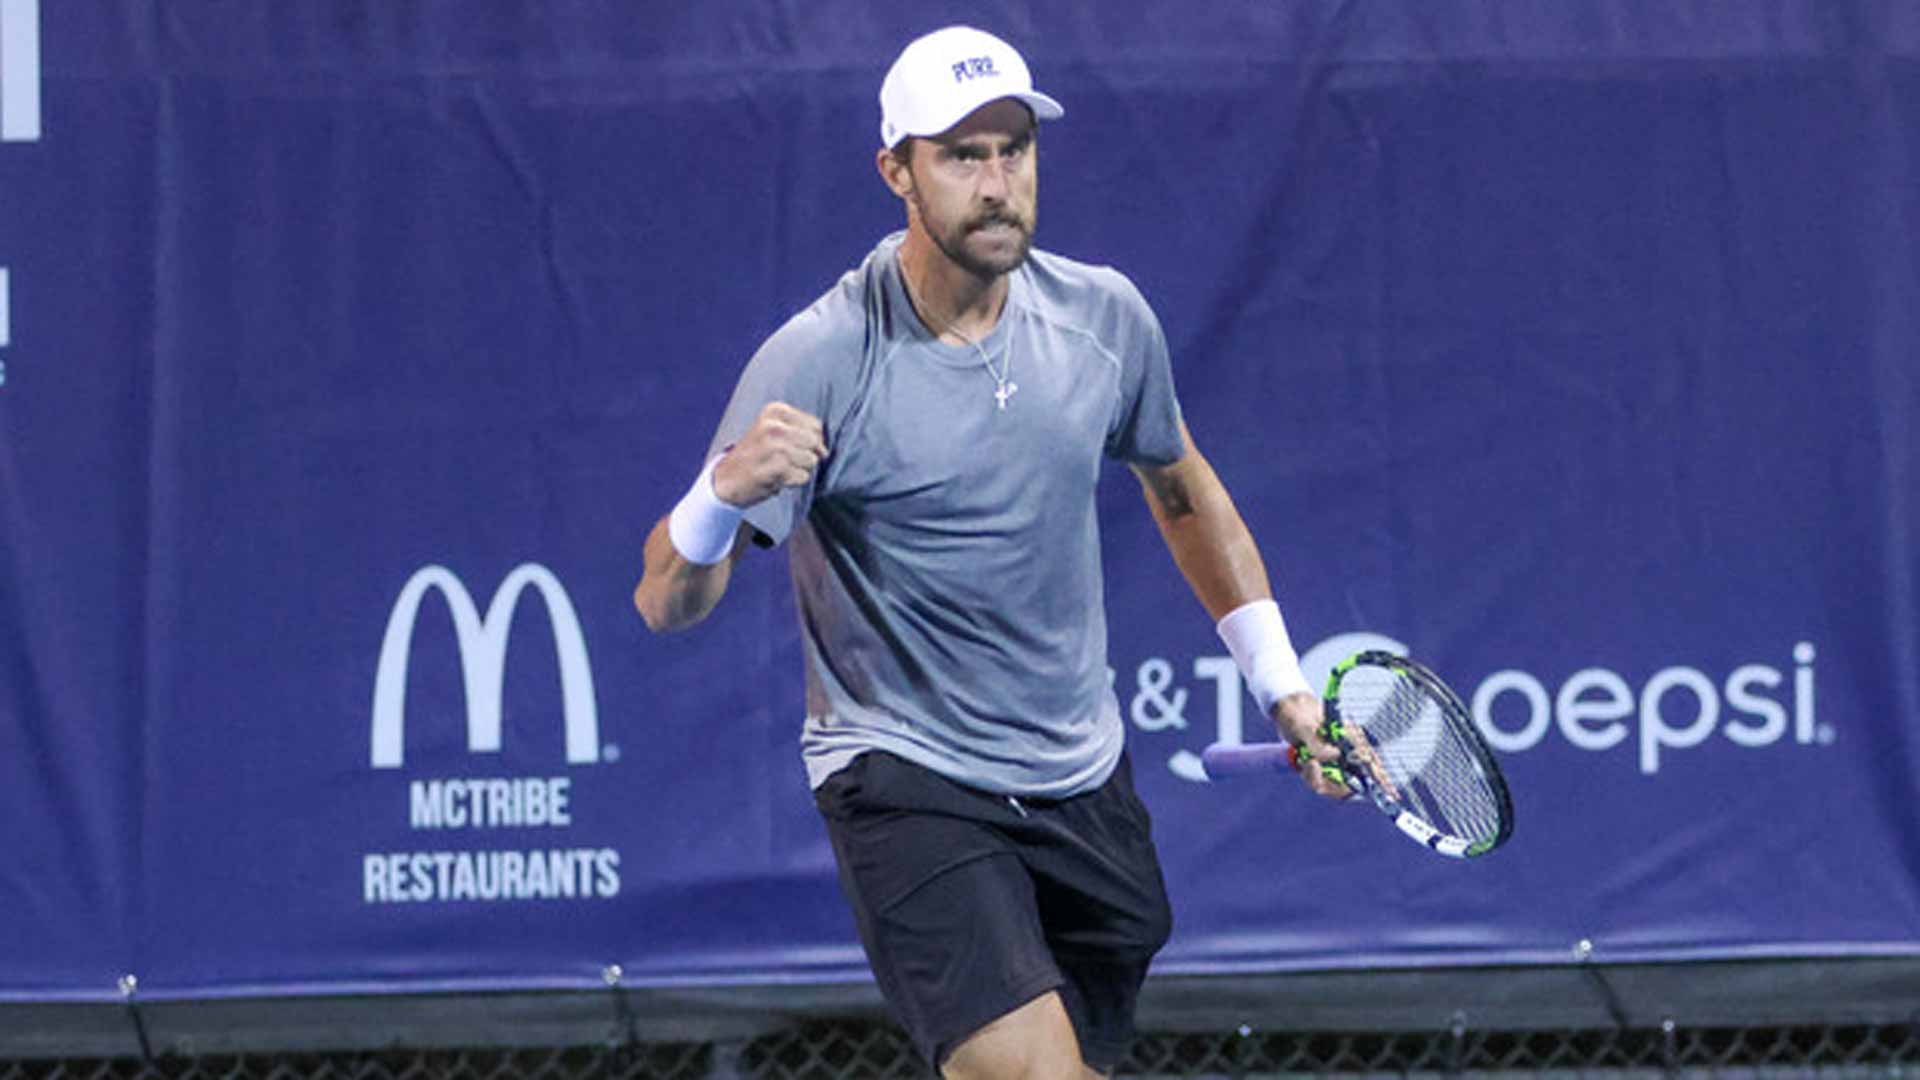 Steve Johnson has earned two ATP Challenger Tour titles in the past month.